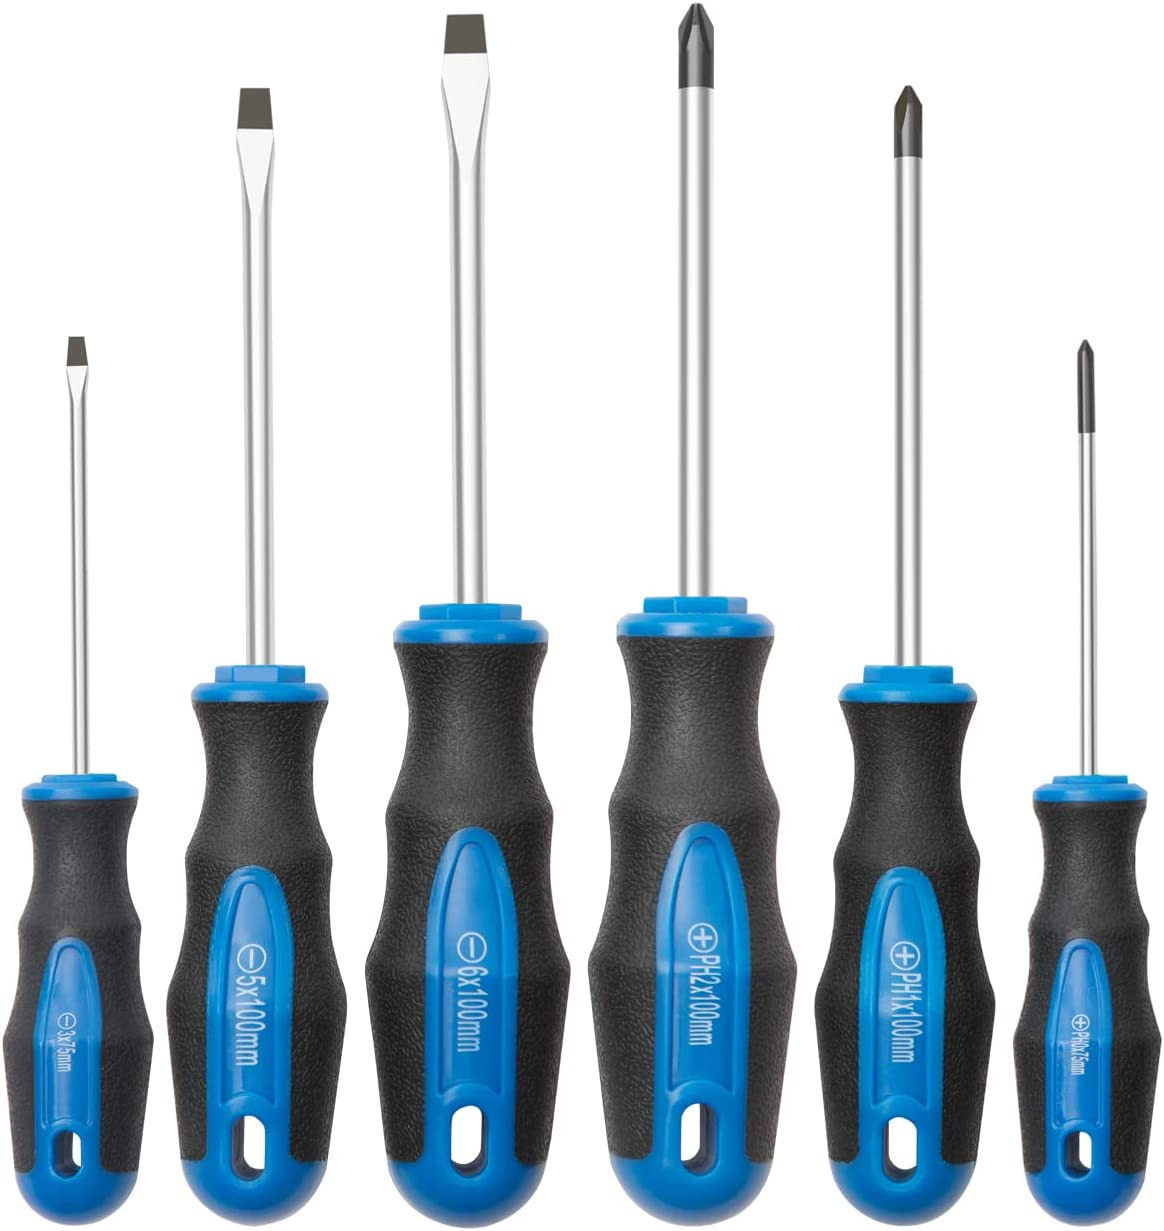 6-Piece Magnetic Tip Screwdriver Set - Phillips and Flat Head, Cushion Grip